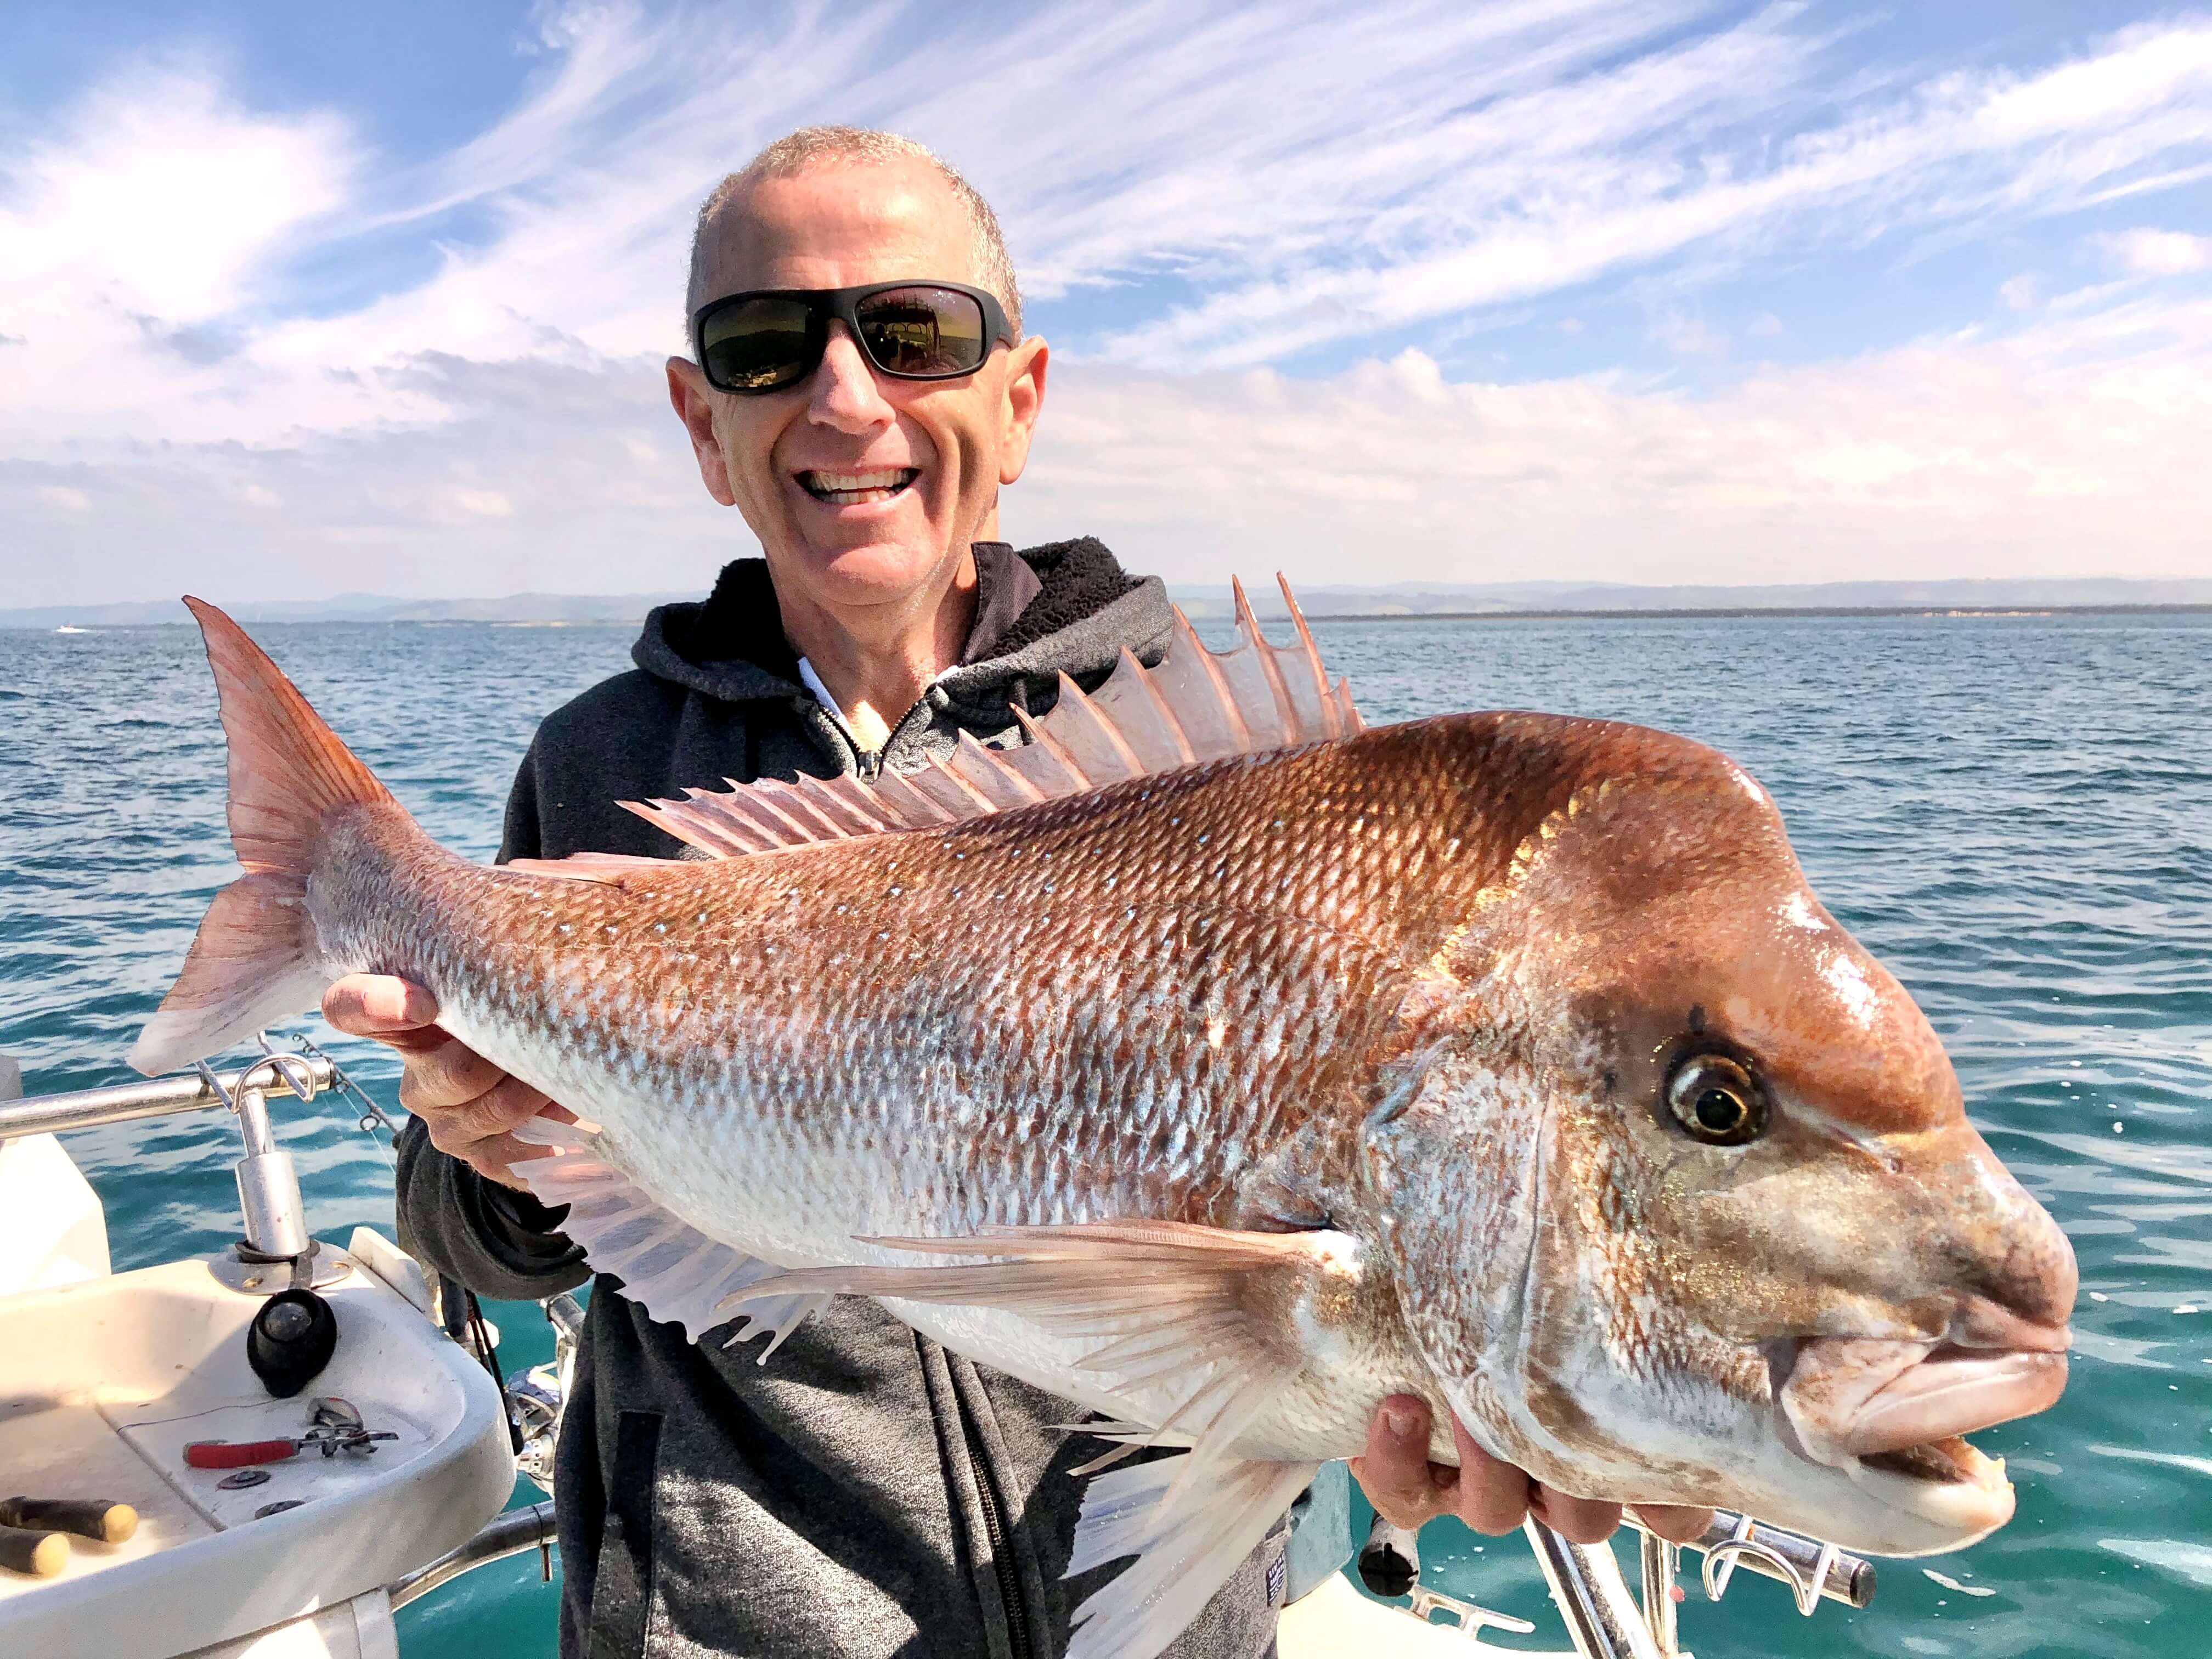 Fergy with a big snapper